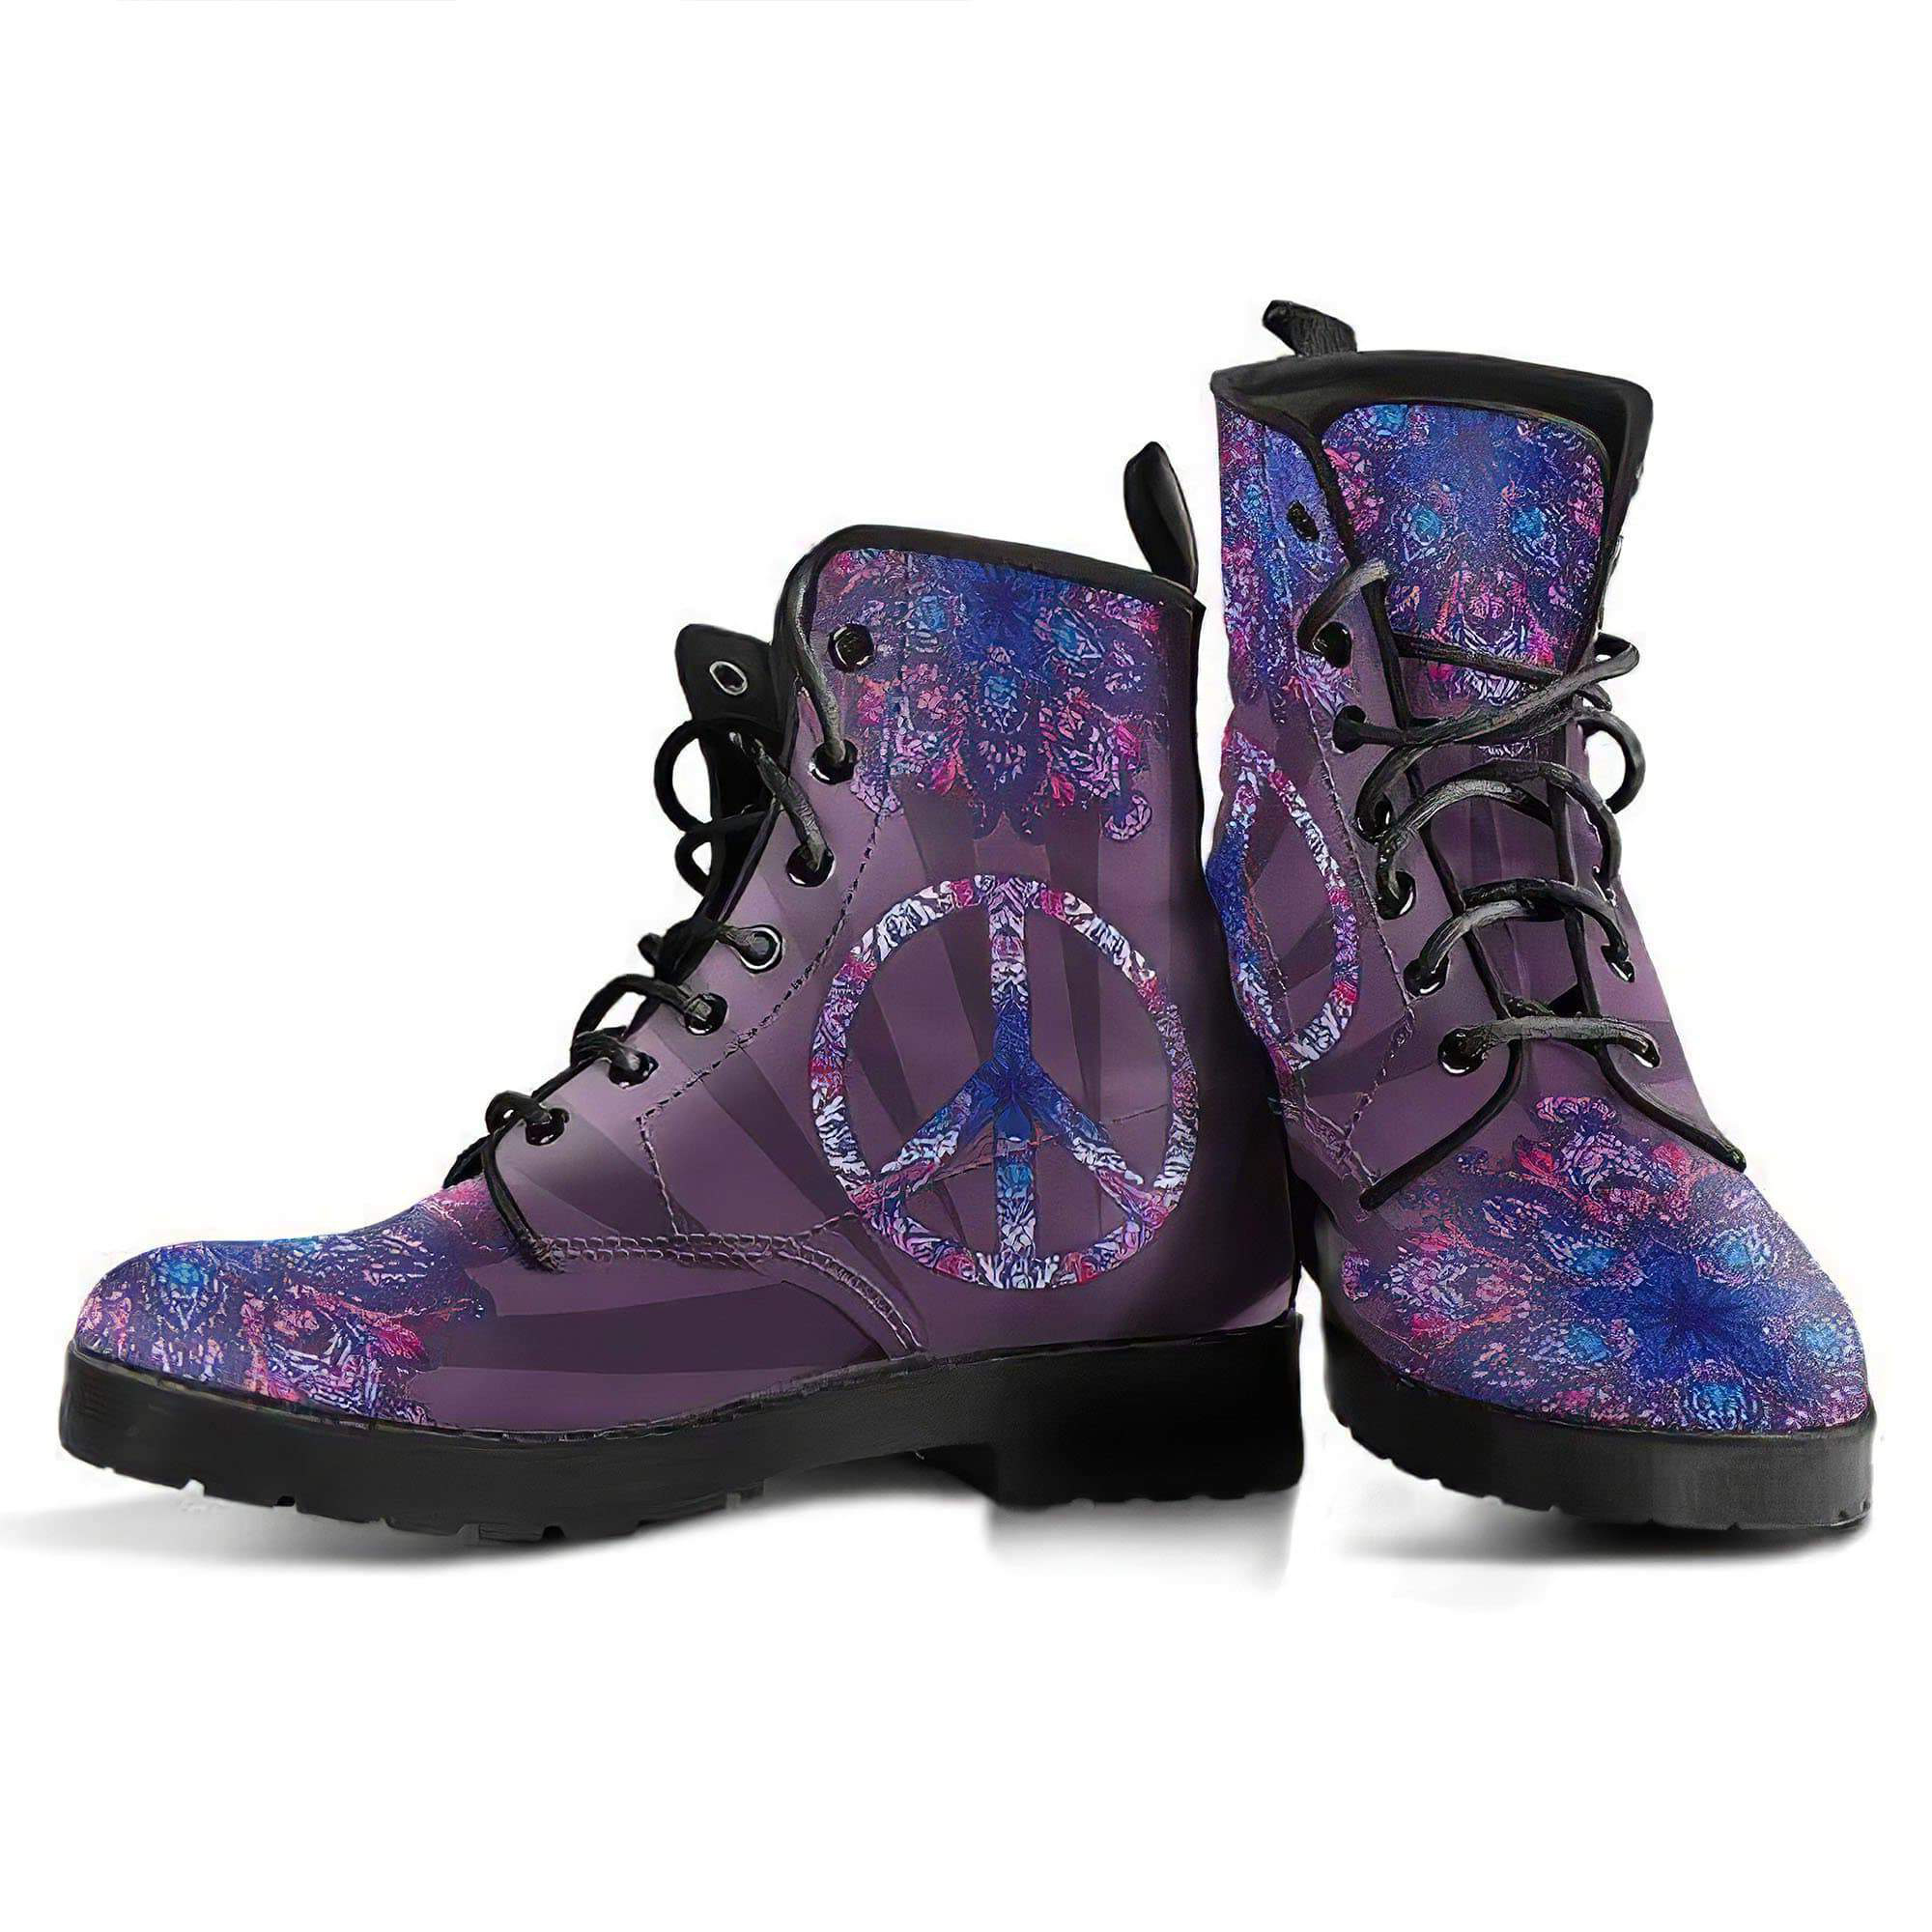 purple-peace-mandala-handcrafted-boots-women-s-leather-boots-12051939917885.jpg